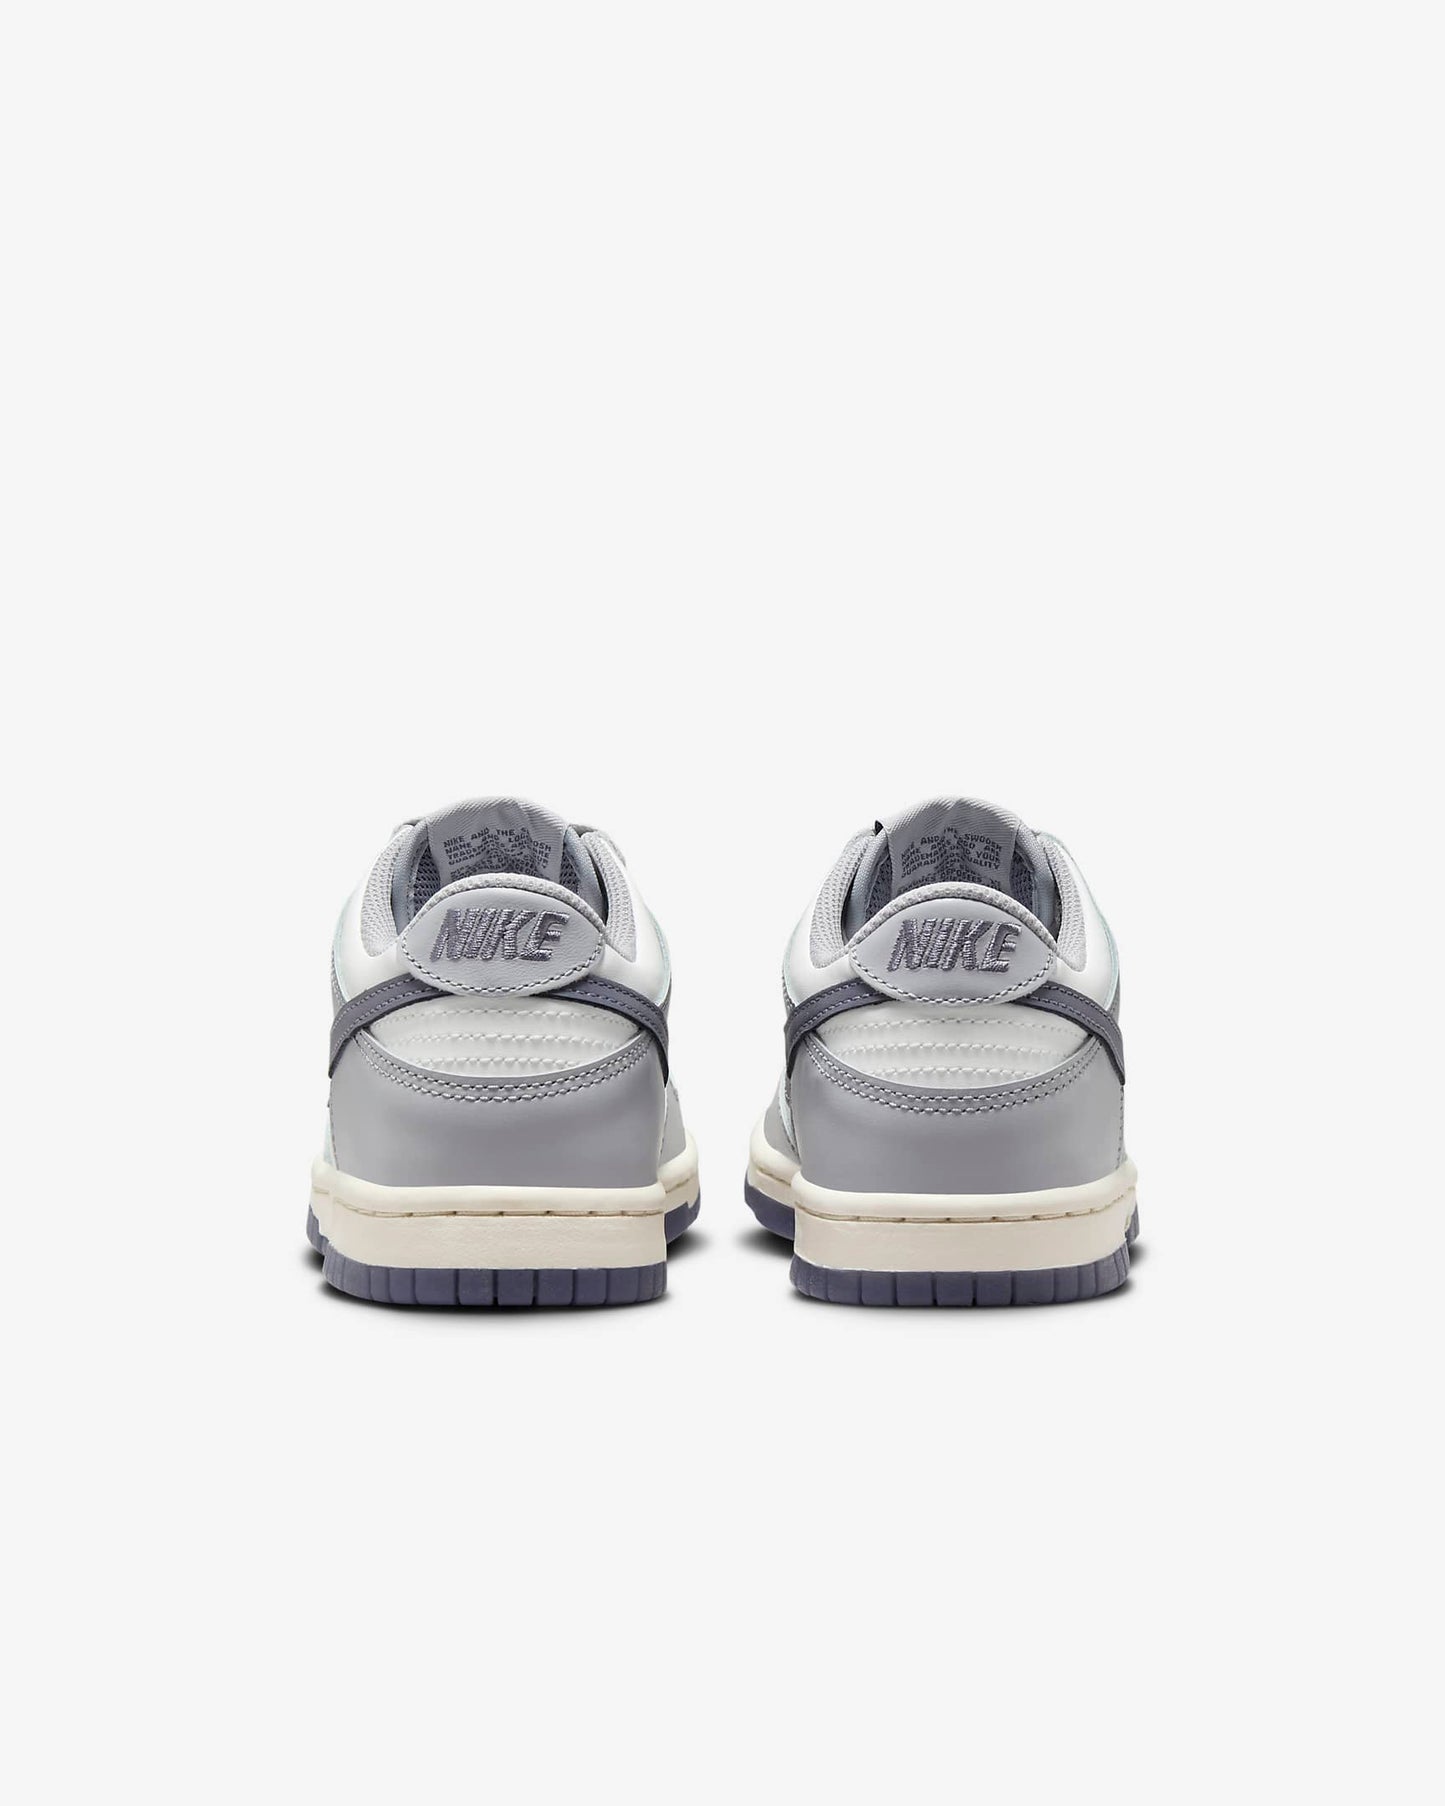 Nike Dunk Summit White Wolf Grey Light Carbon Shoes